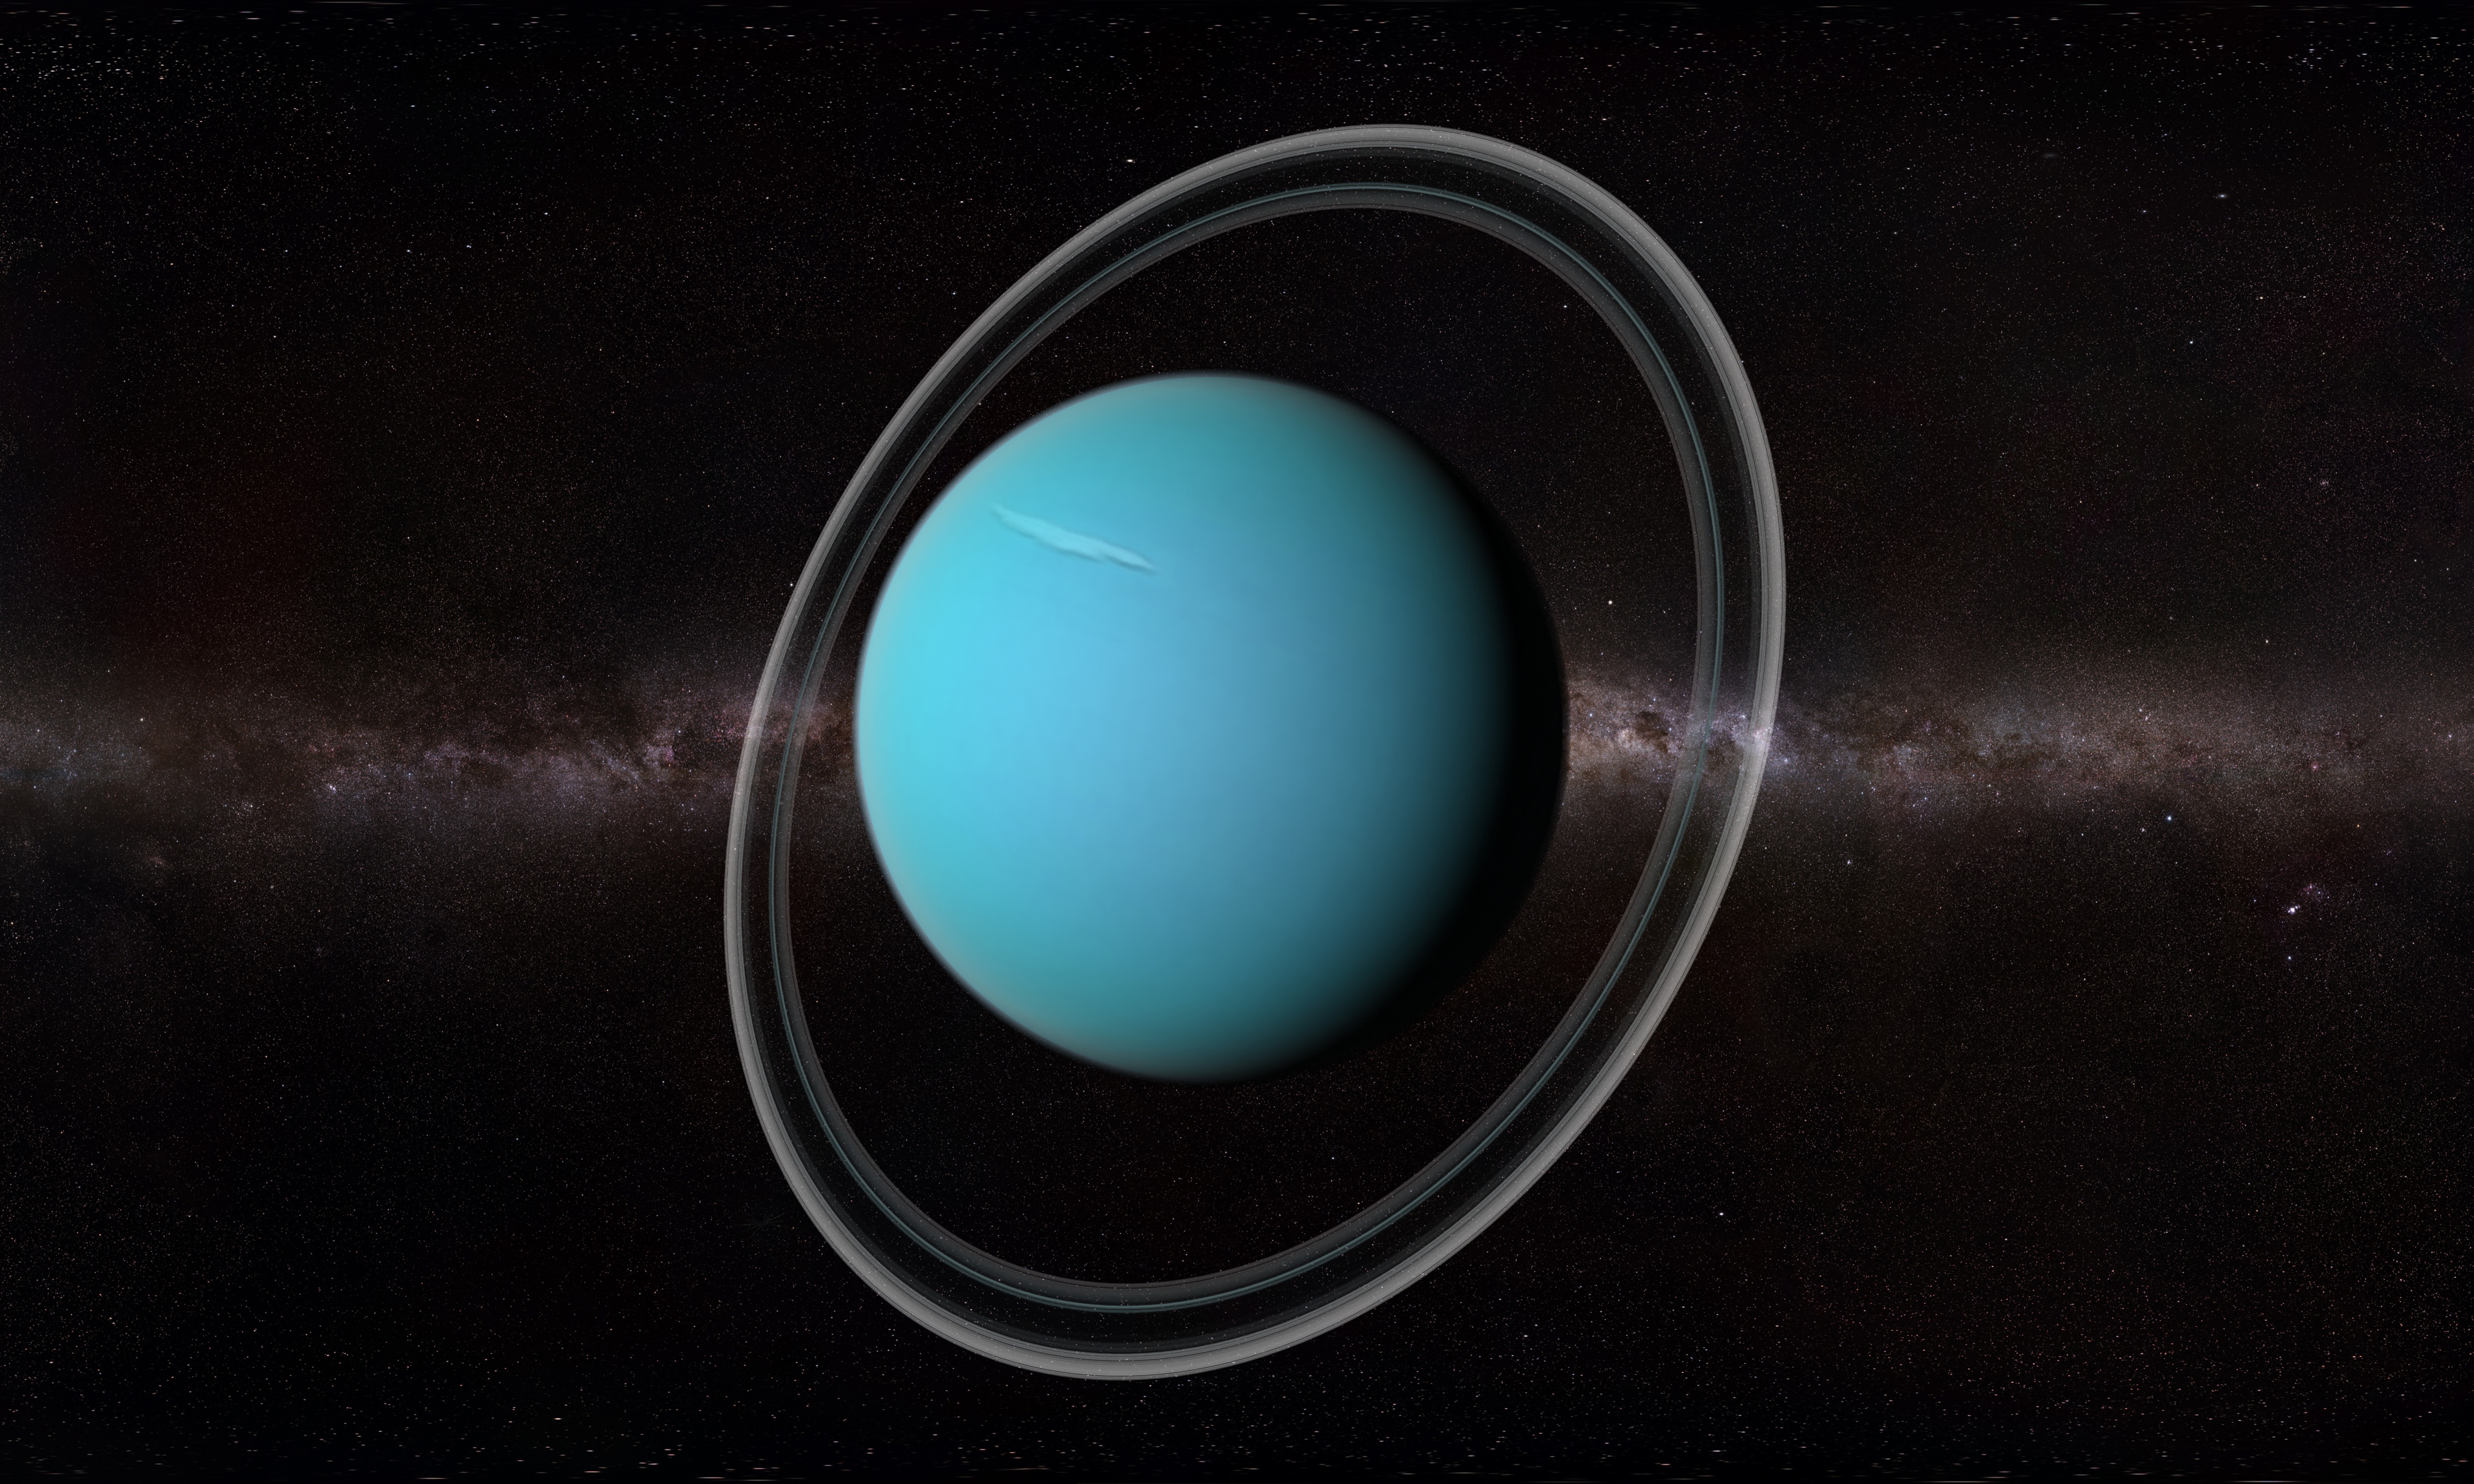 Uranus: Facts about the ringed planet that sits on its side | Space